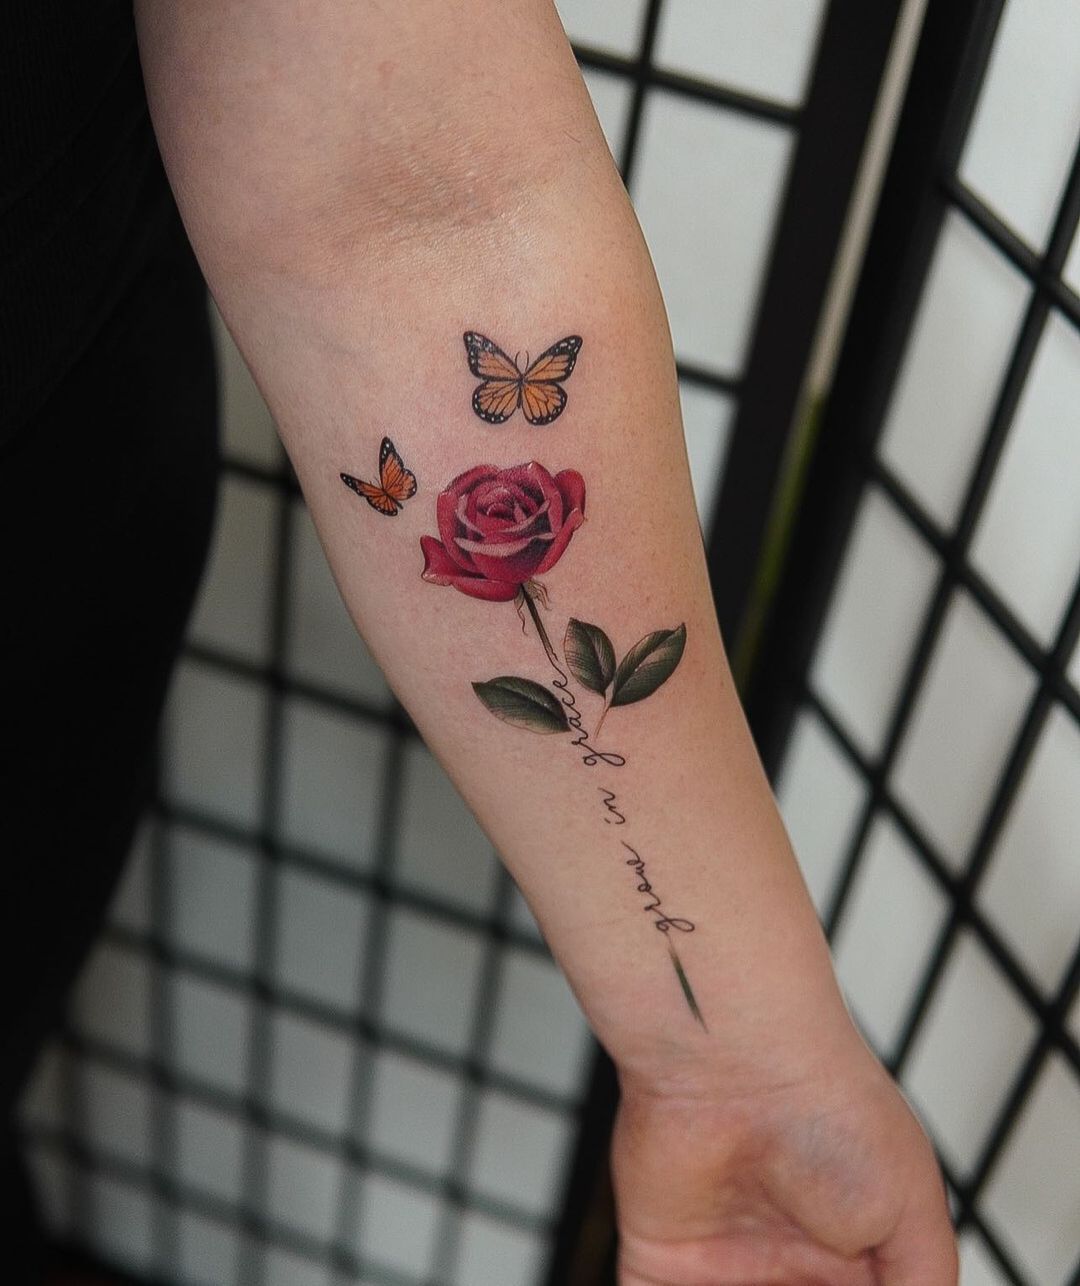 Forearm Tattoo Rose Butterfly